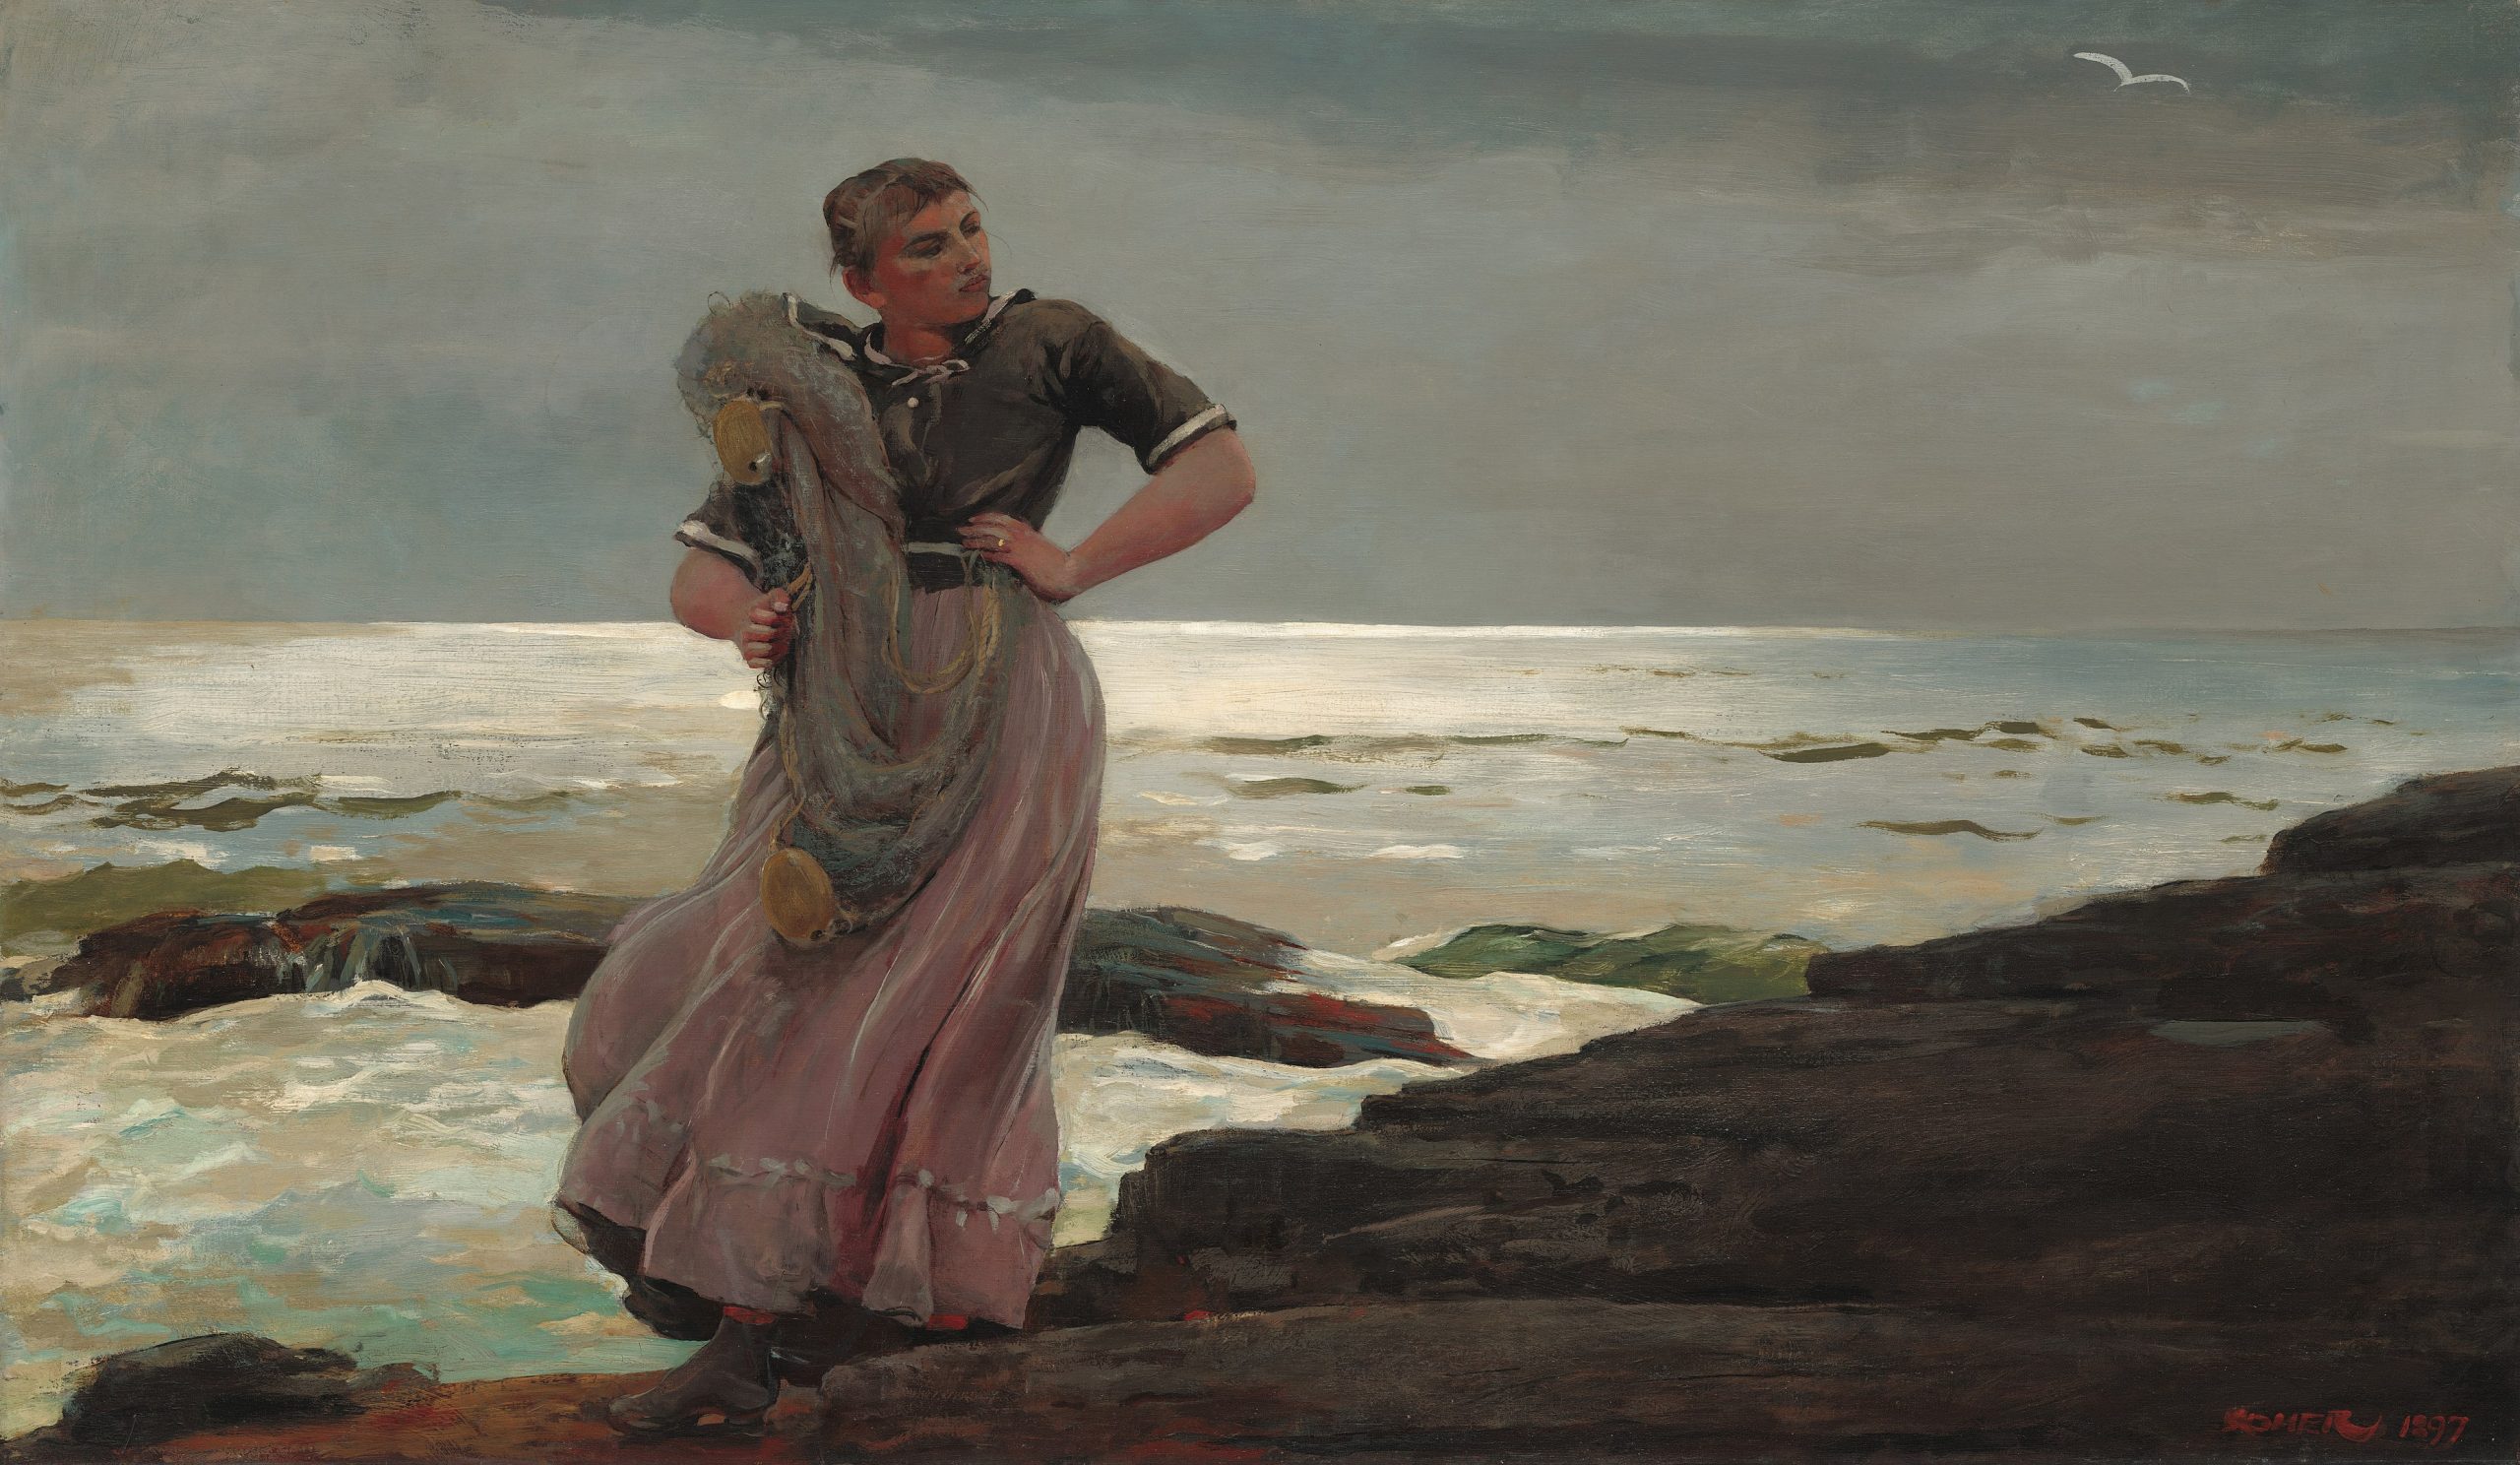 A woman standing on a rocky shoreline gazing to her left with a fishing net and buoys slung over her shoulder